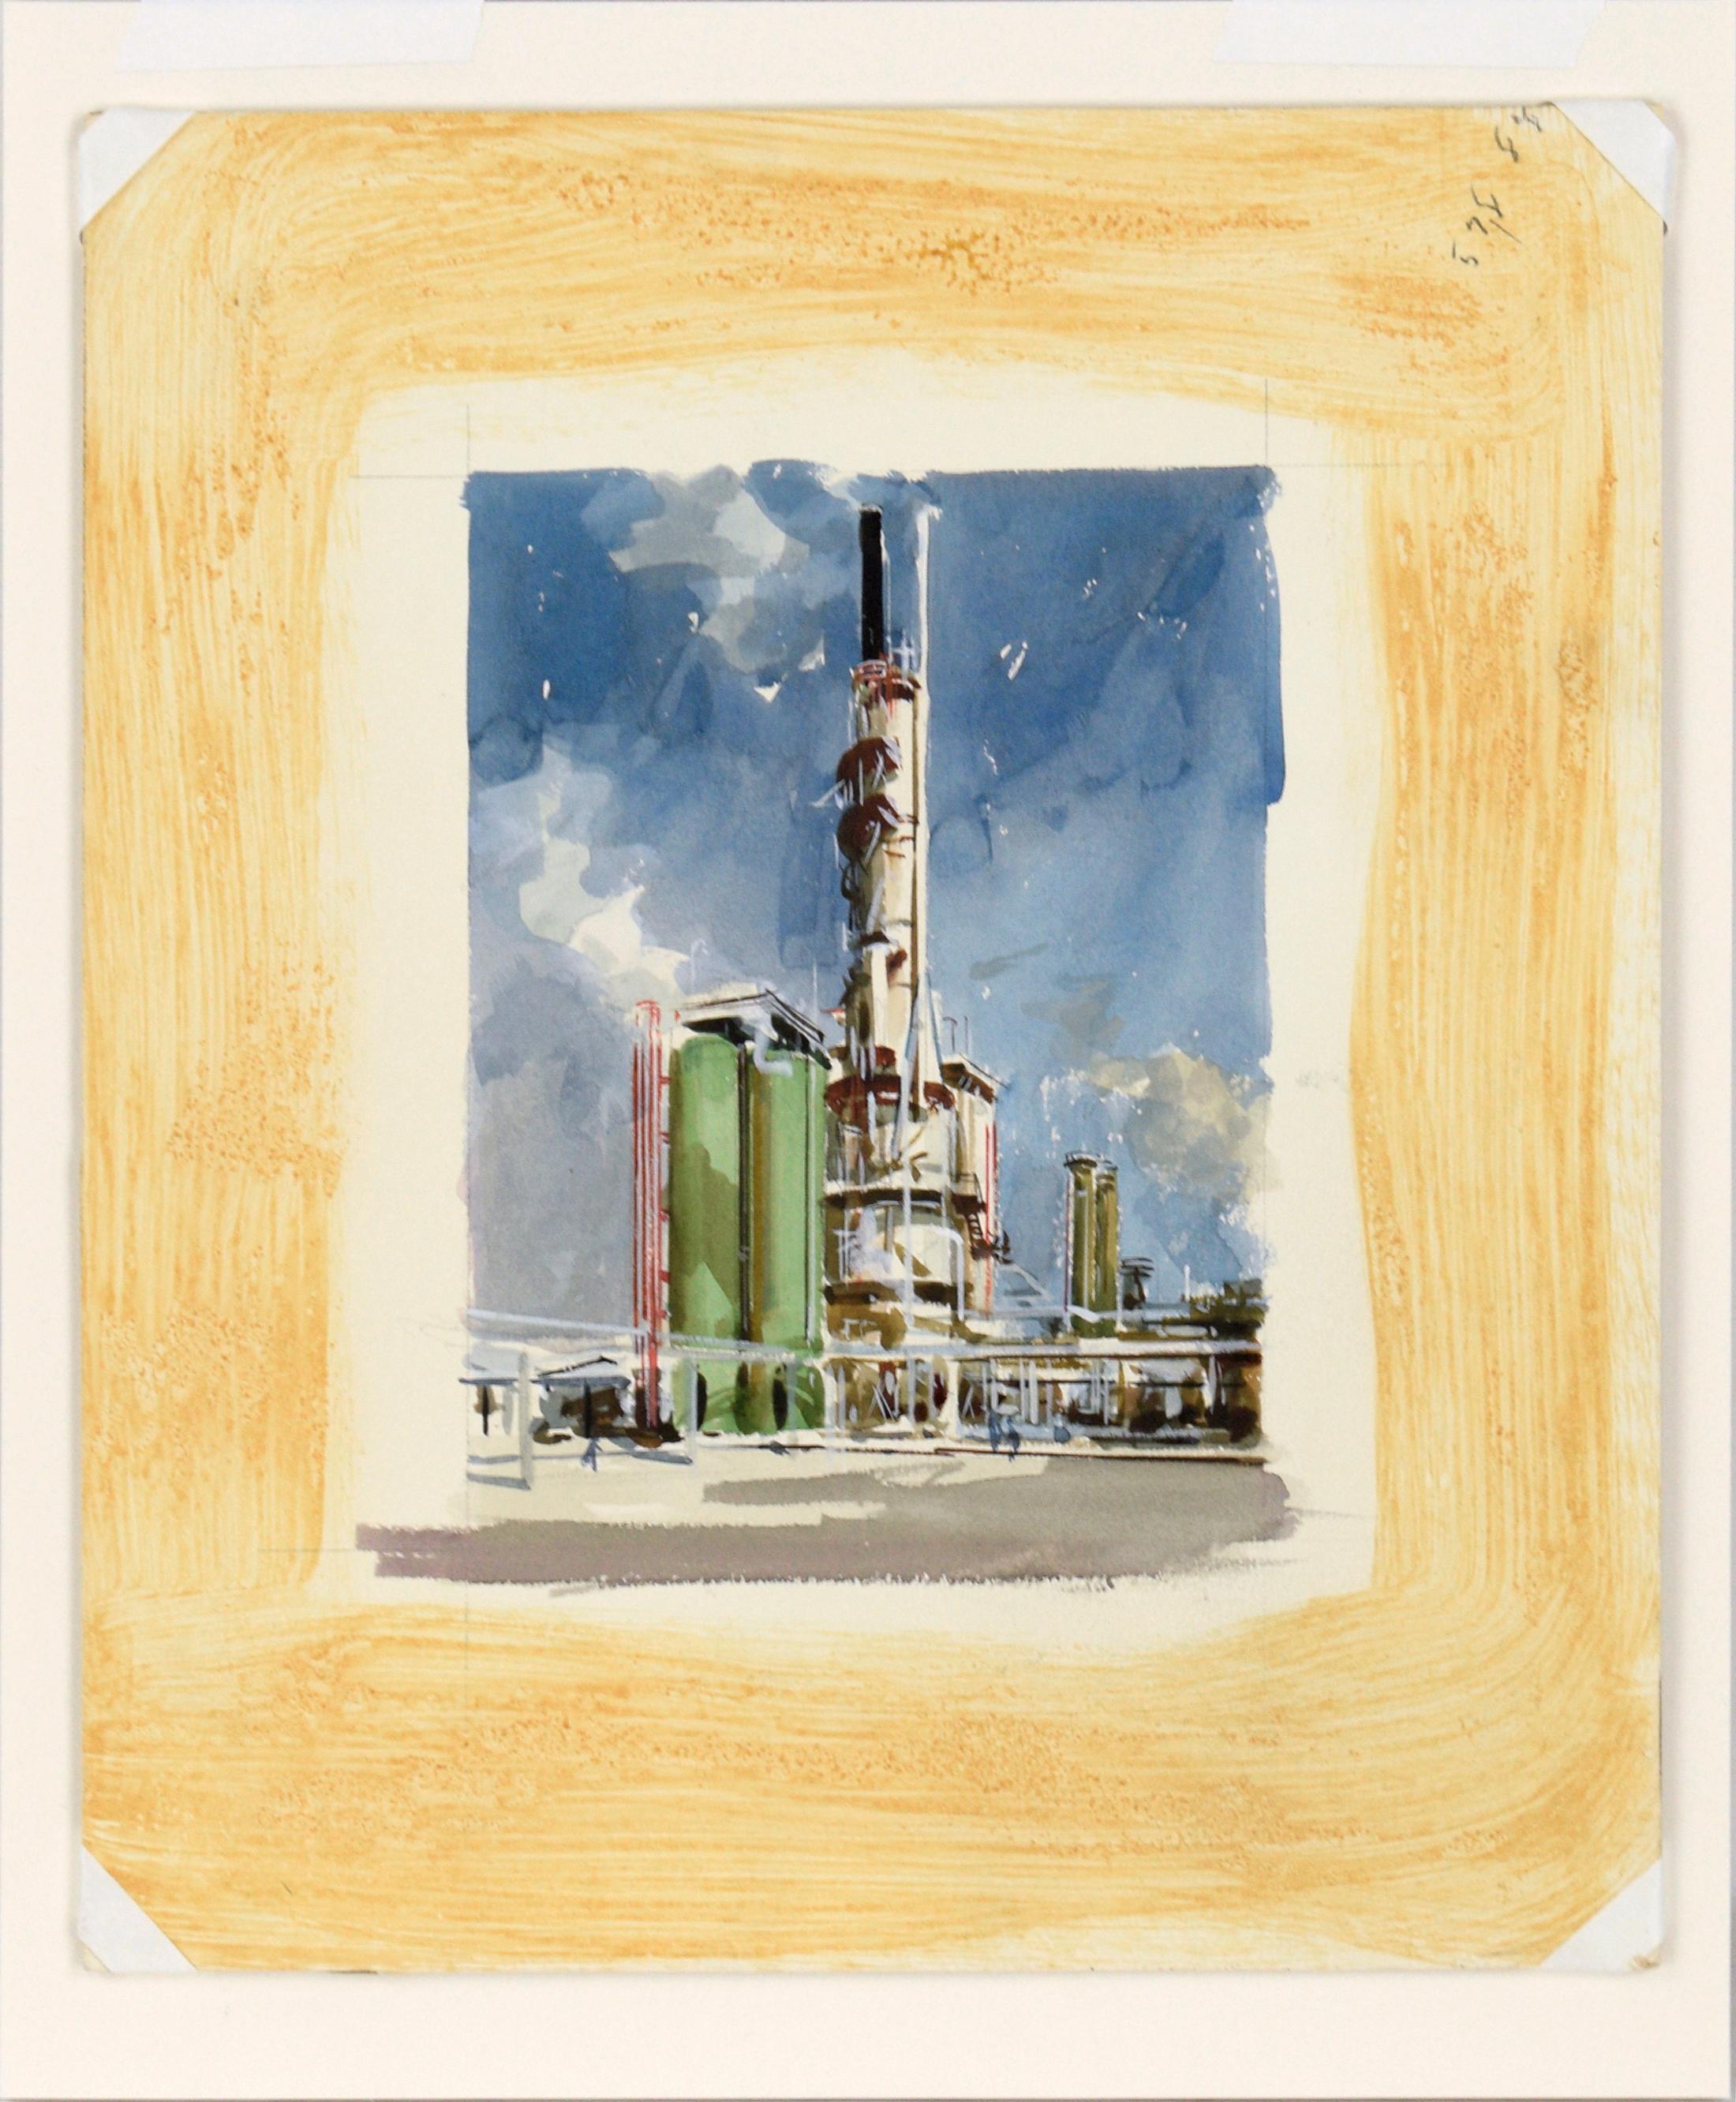 Smokestack at the Refinery - Realistic Industrial Illustration in Gouache - White Figurative Painting by Charles Kinghan